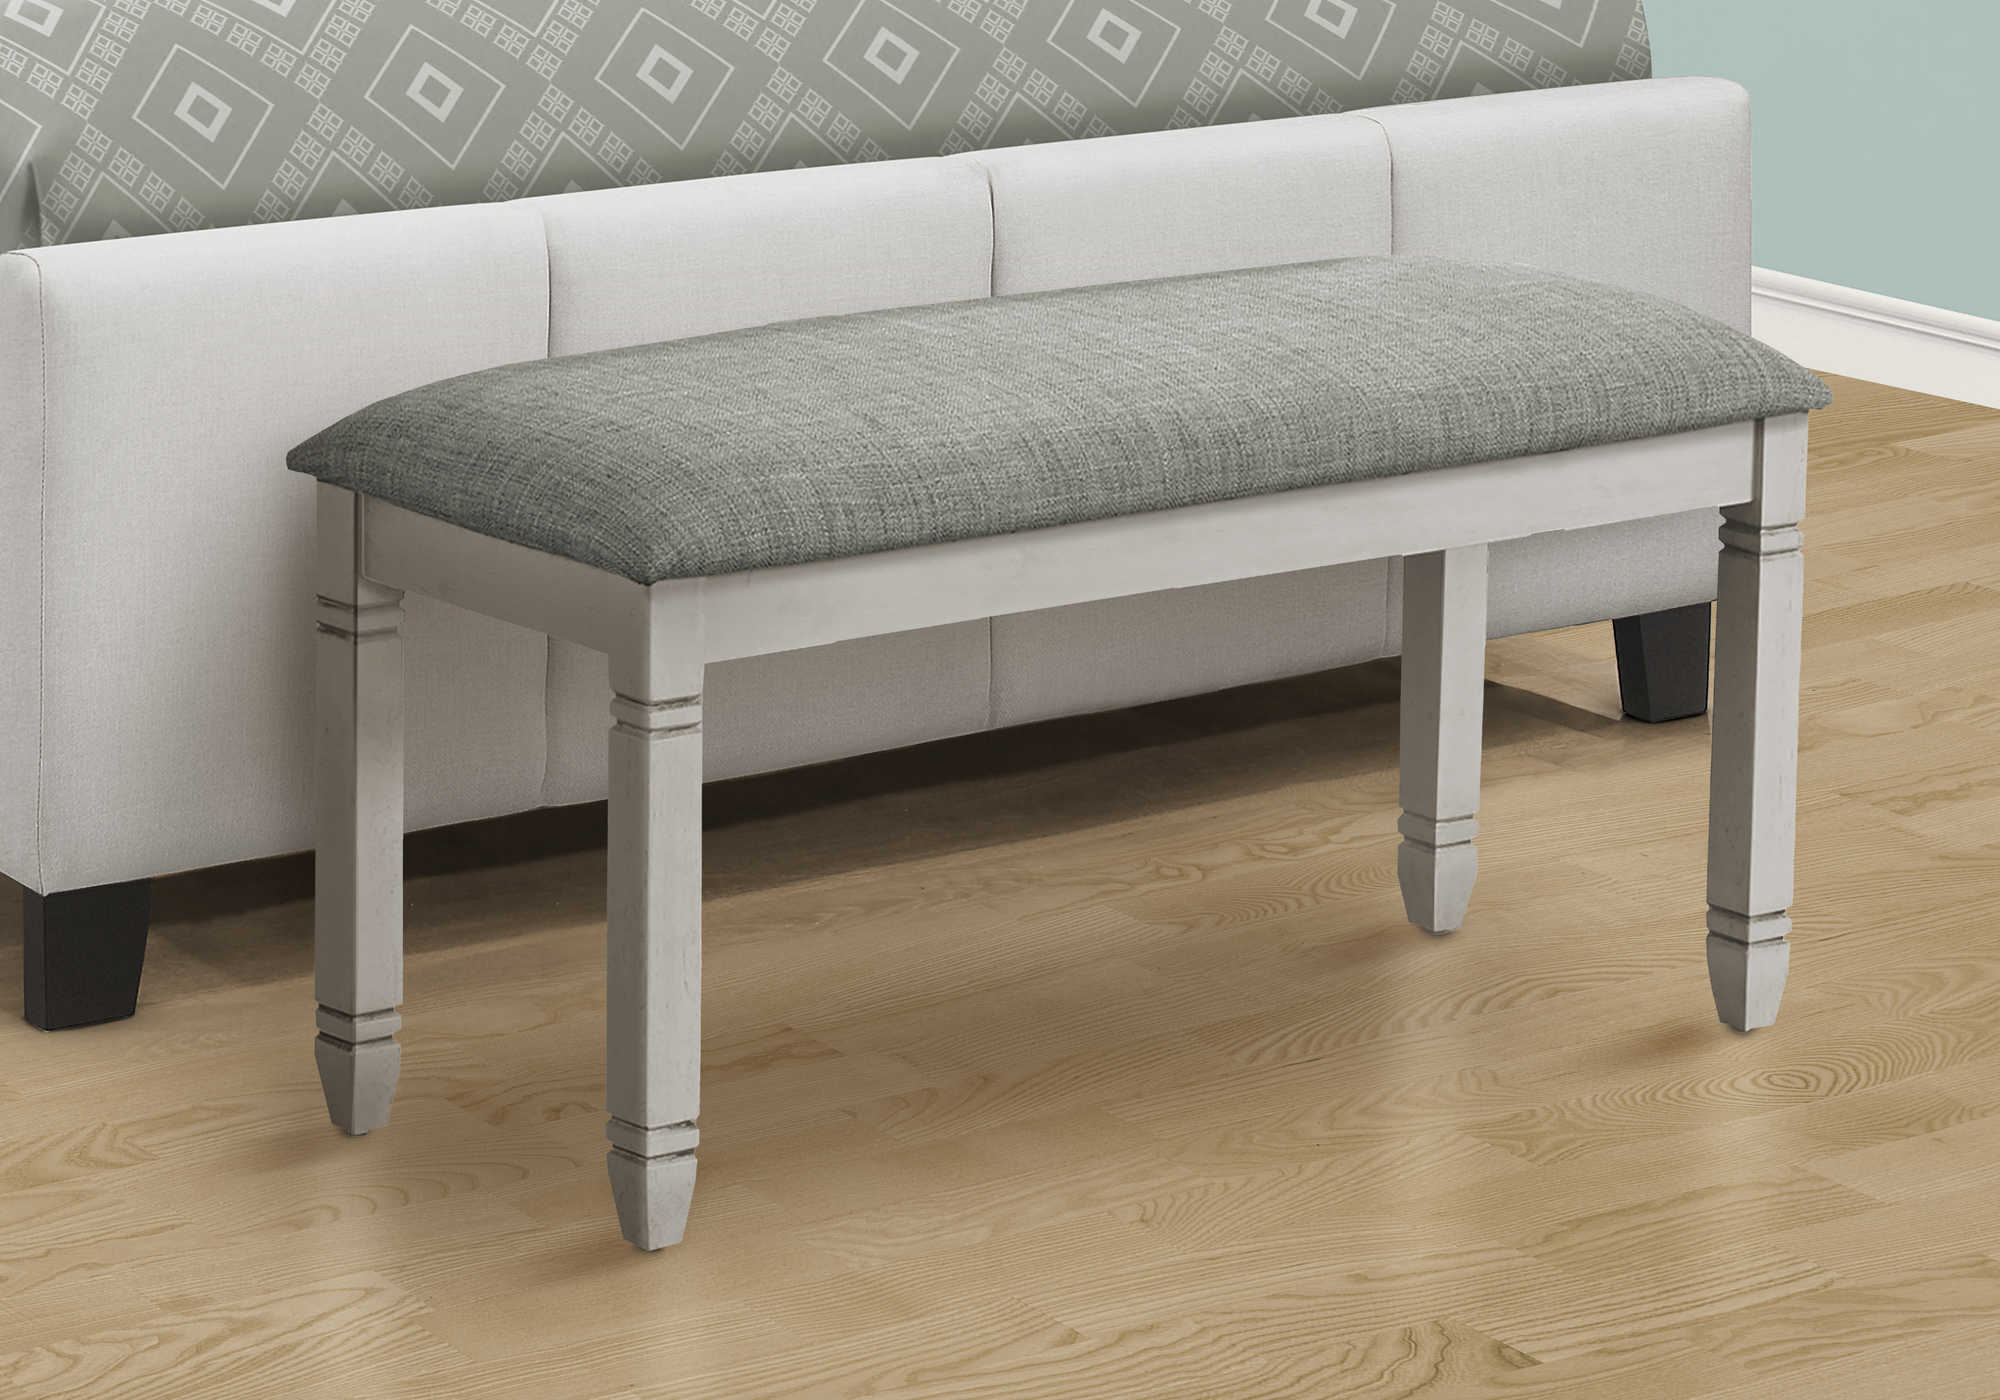 BENCH - 41"L / UPHOLSTERED GREY FABRIC